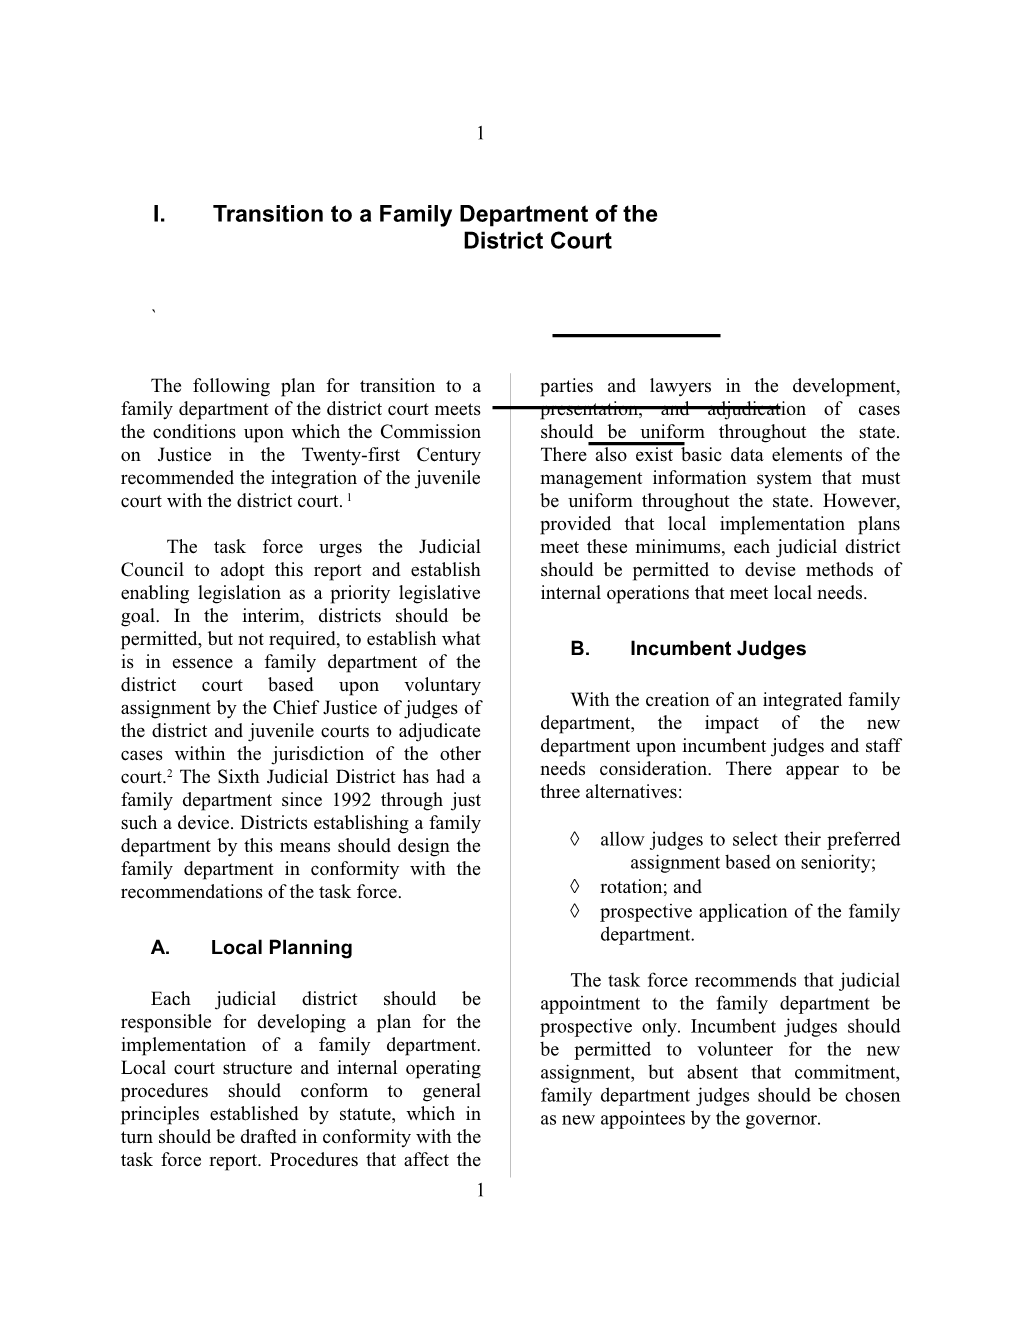 I.Transition to a Family Department of the District Court